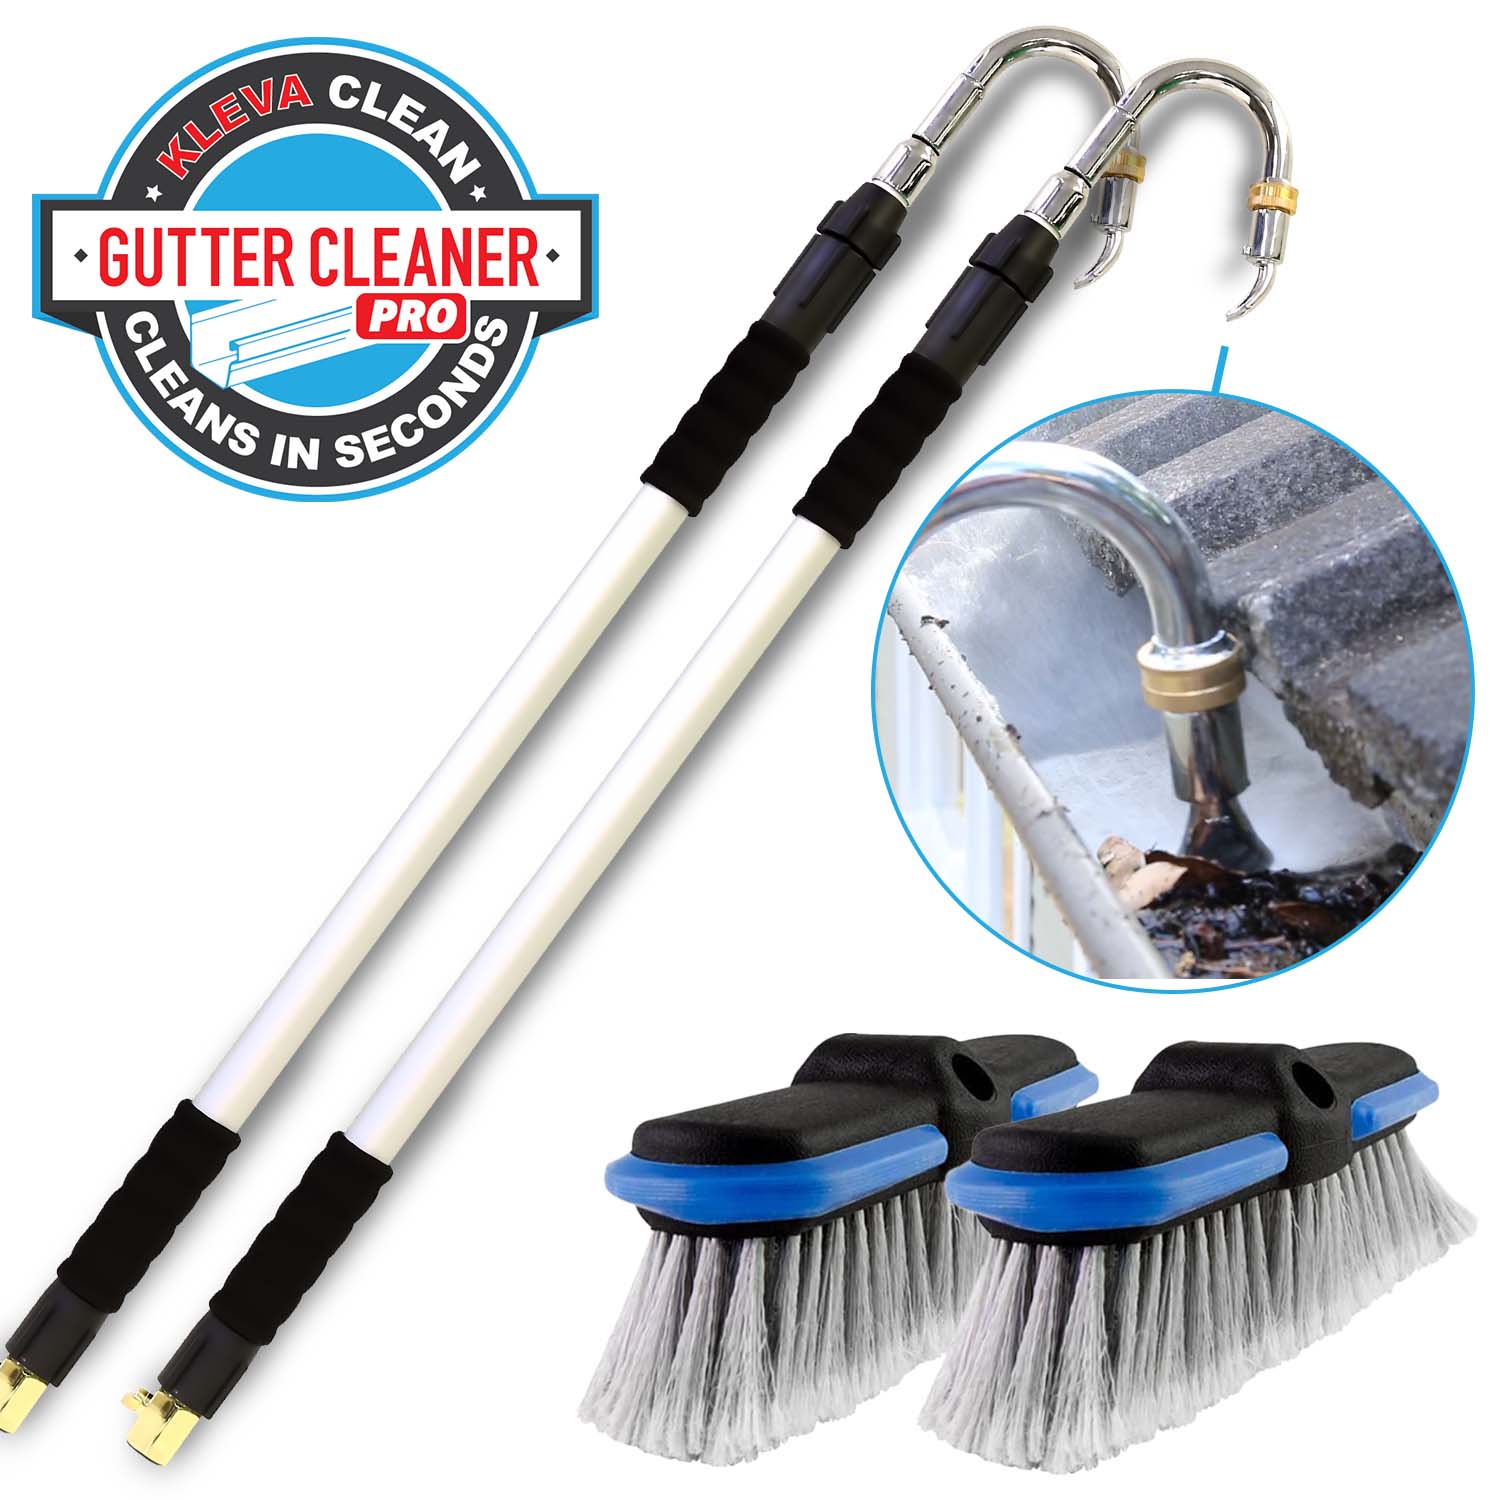 Image of Gutter Cleaner PRO - Telescopic, Pressure Cleaner To Instantly Clear Your Gutters!